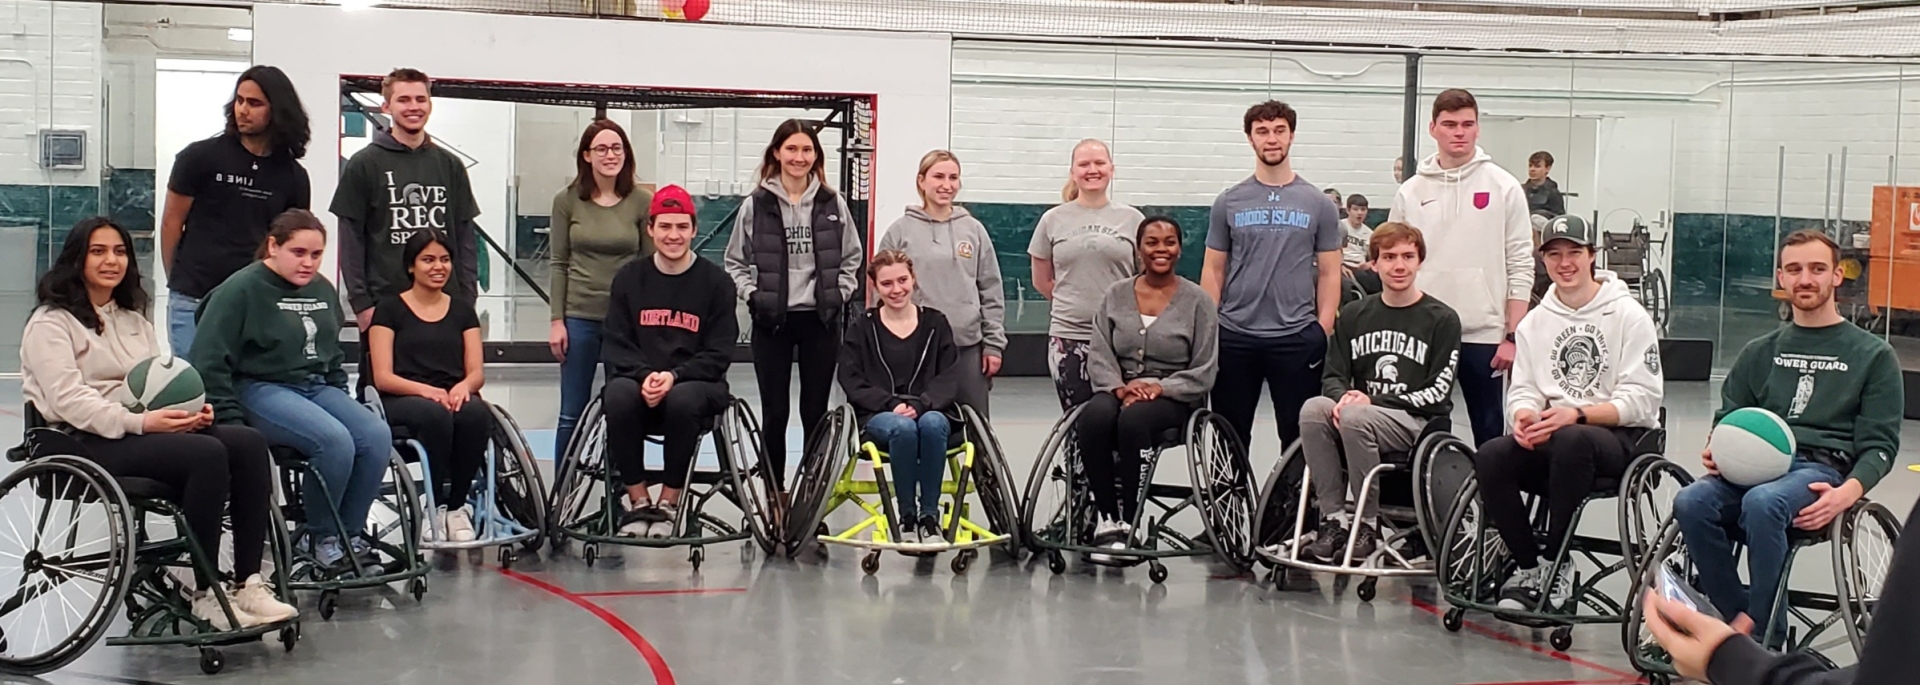 A group shot of some of the attendees smiling. Some are standing and some are in wheelchairs. 